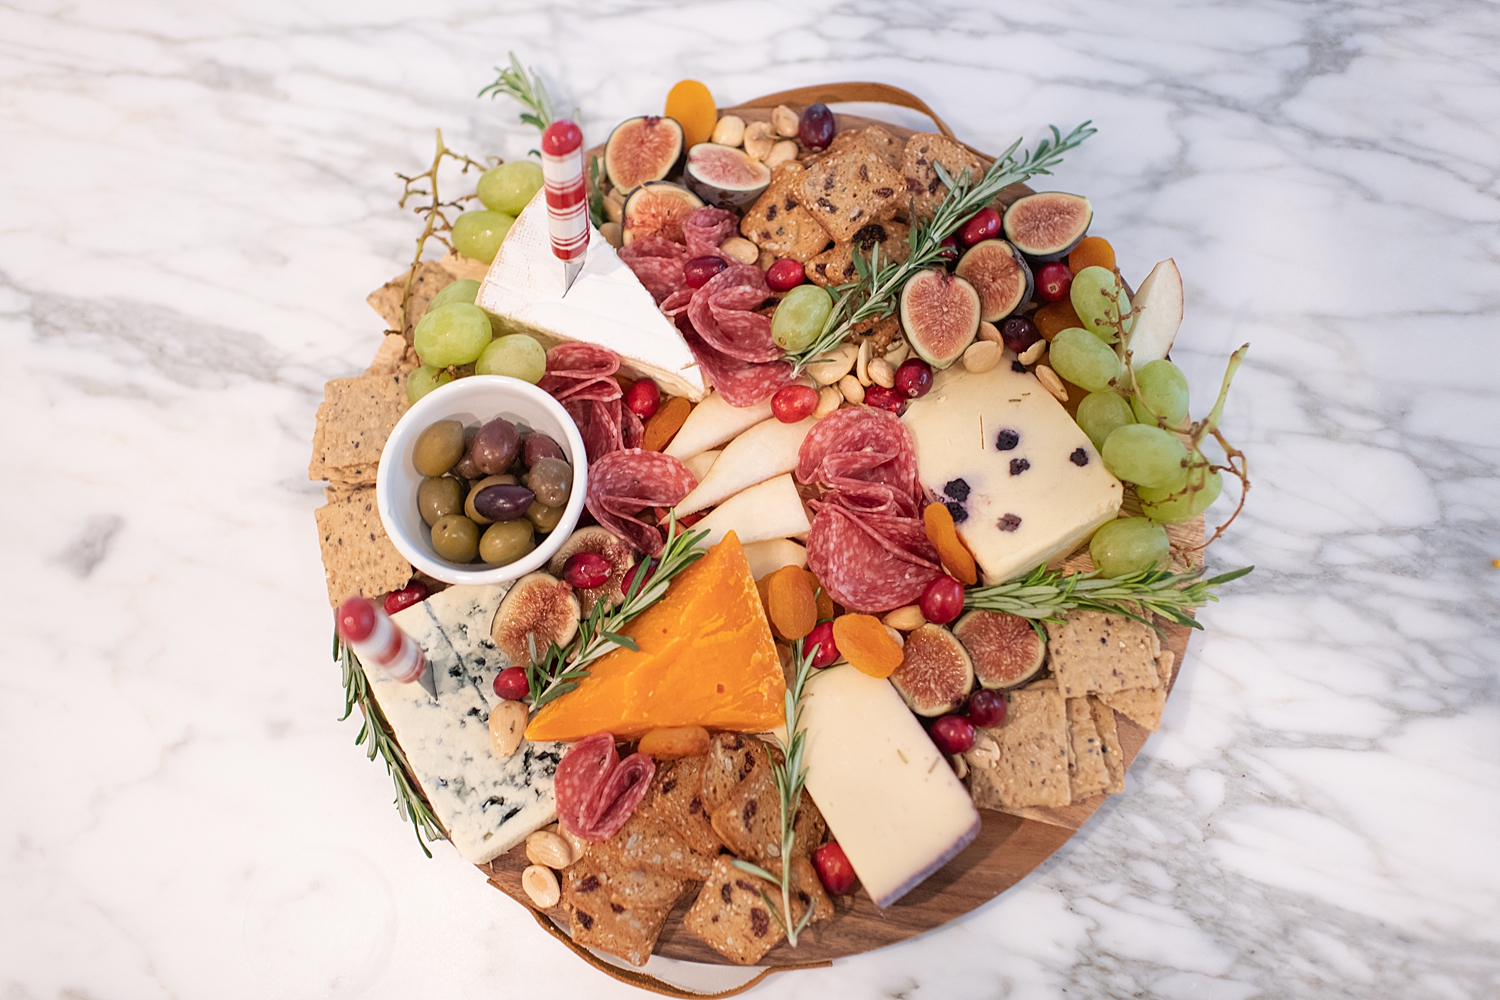 Top Houston life and style blogger, Fancy Ashley, features her tips to prepare the perfect Charcuterie Tray for the Holidays: image of a festive charcuterie tray